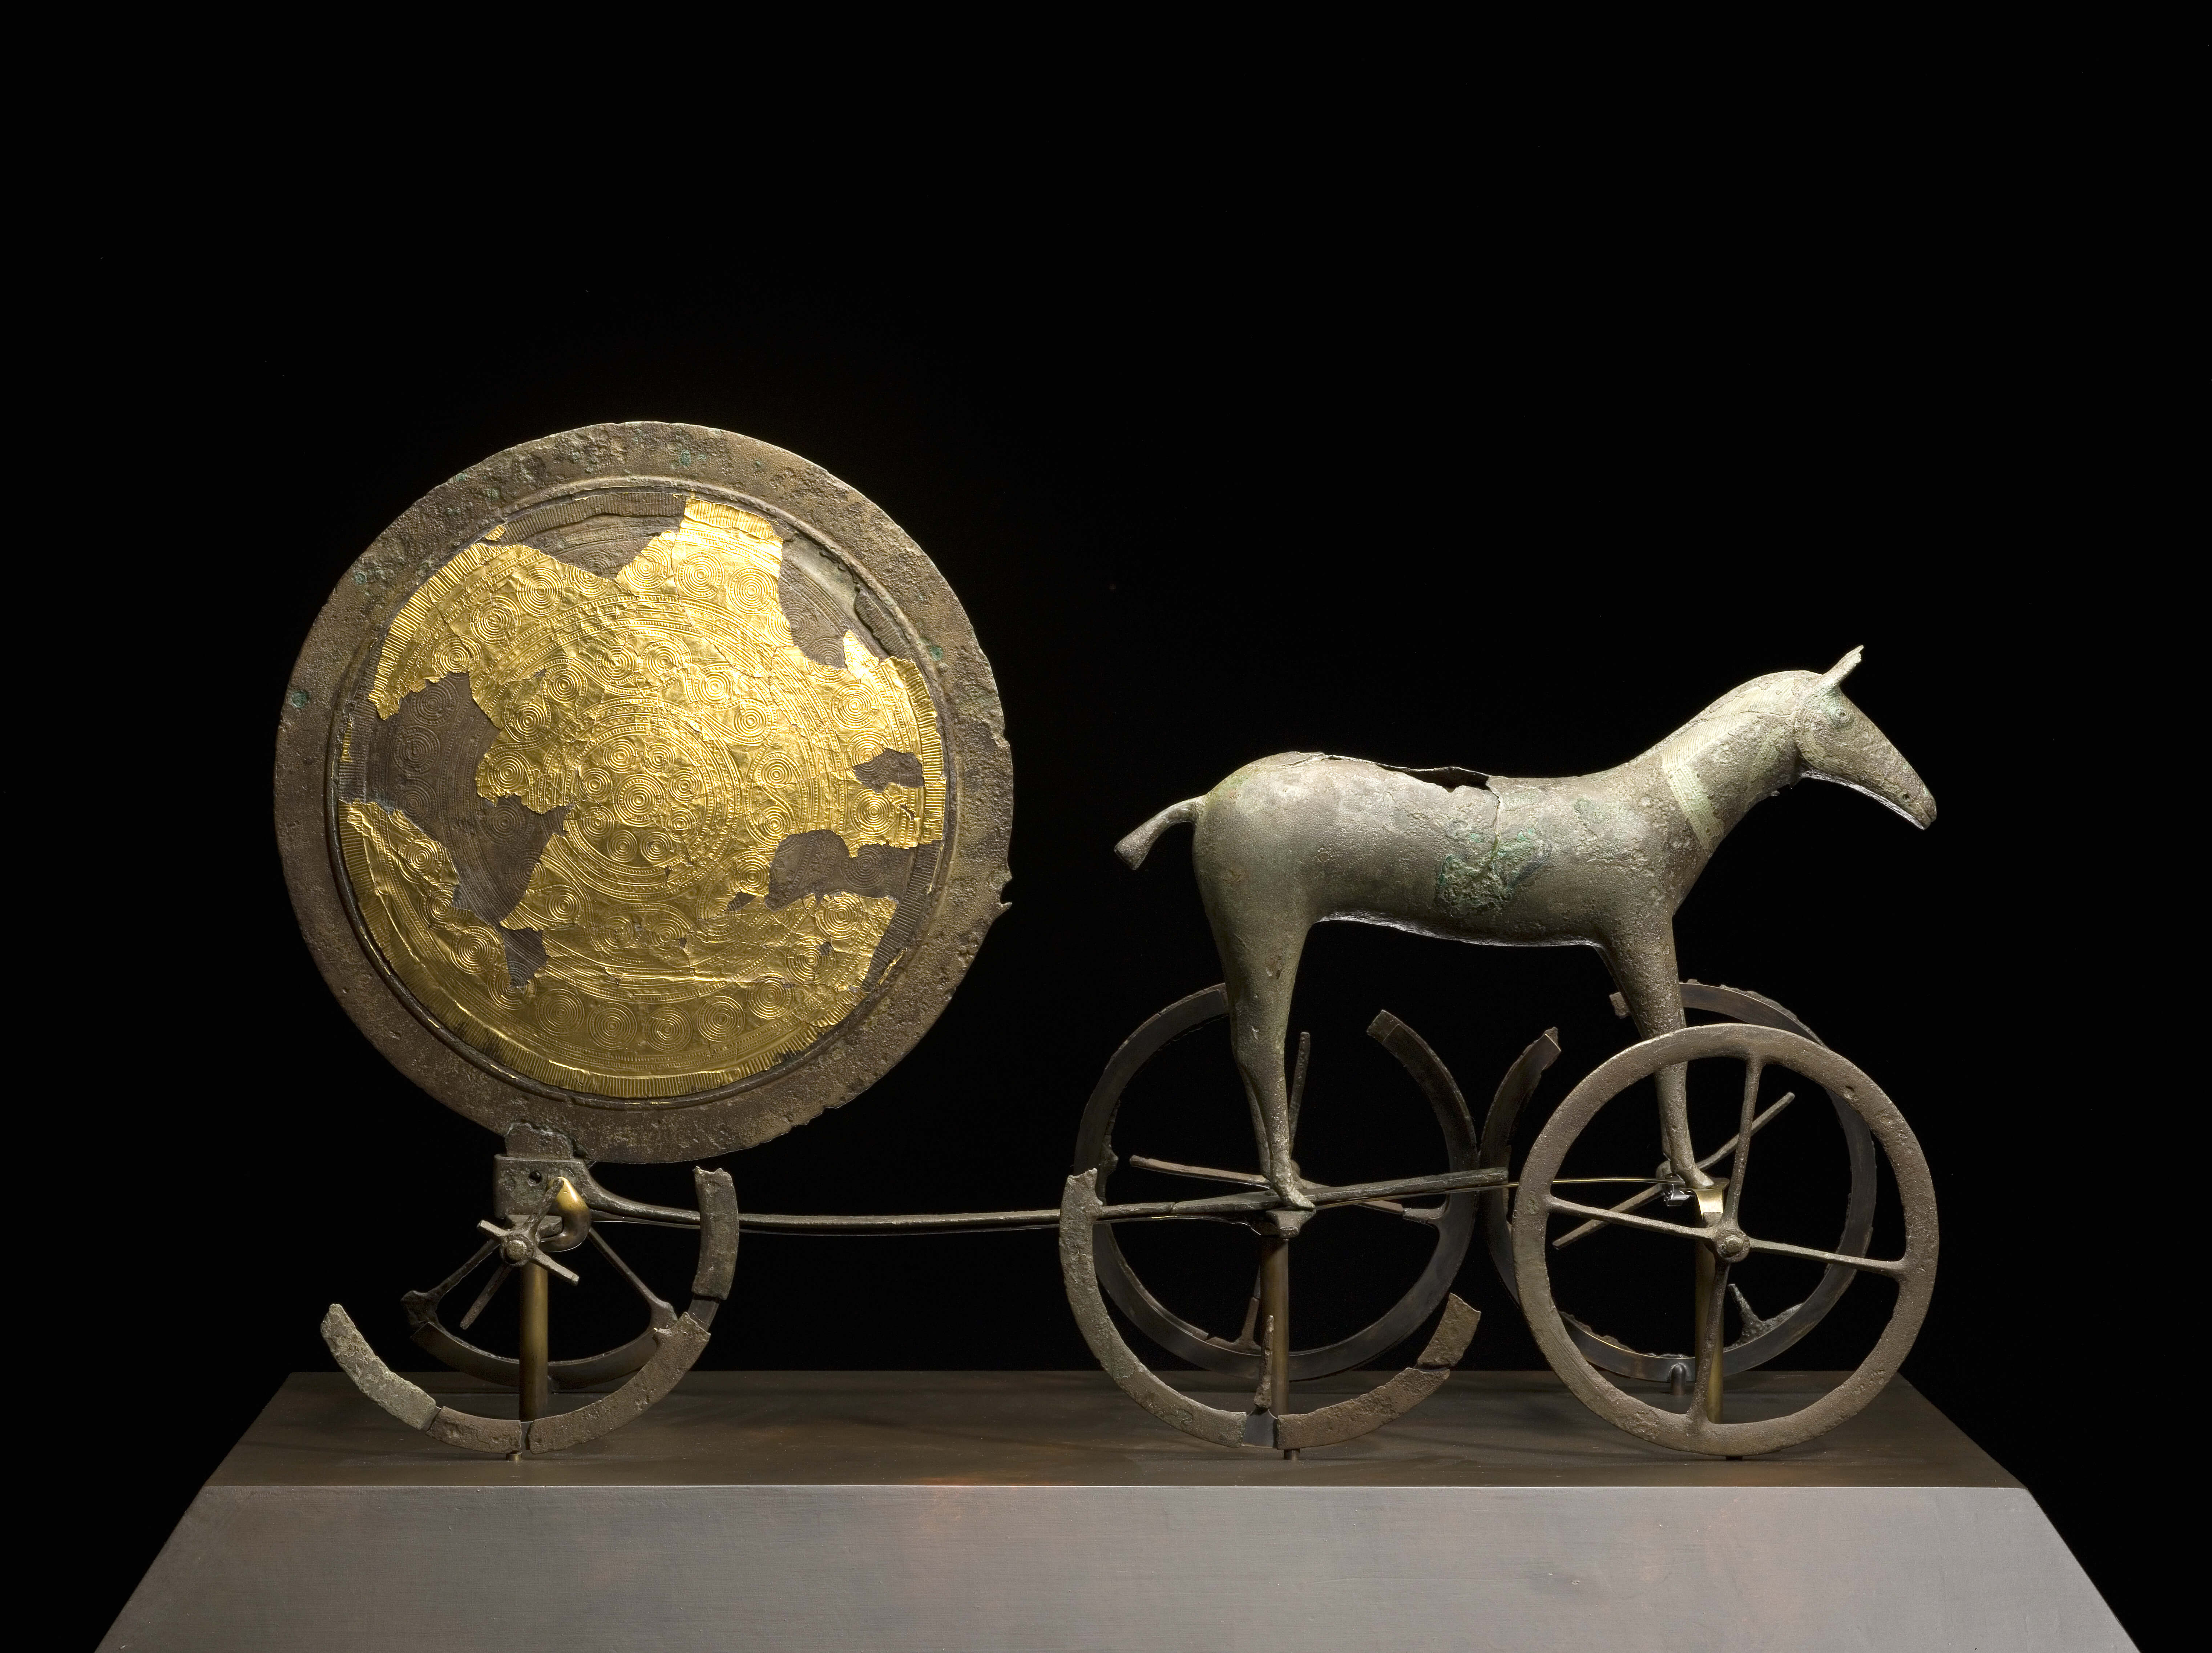 The Trunderup sun chariot